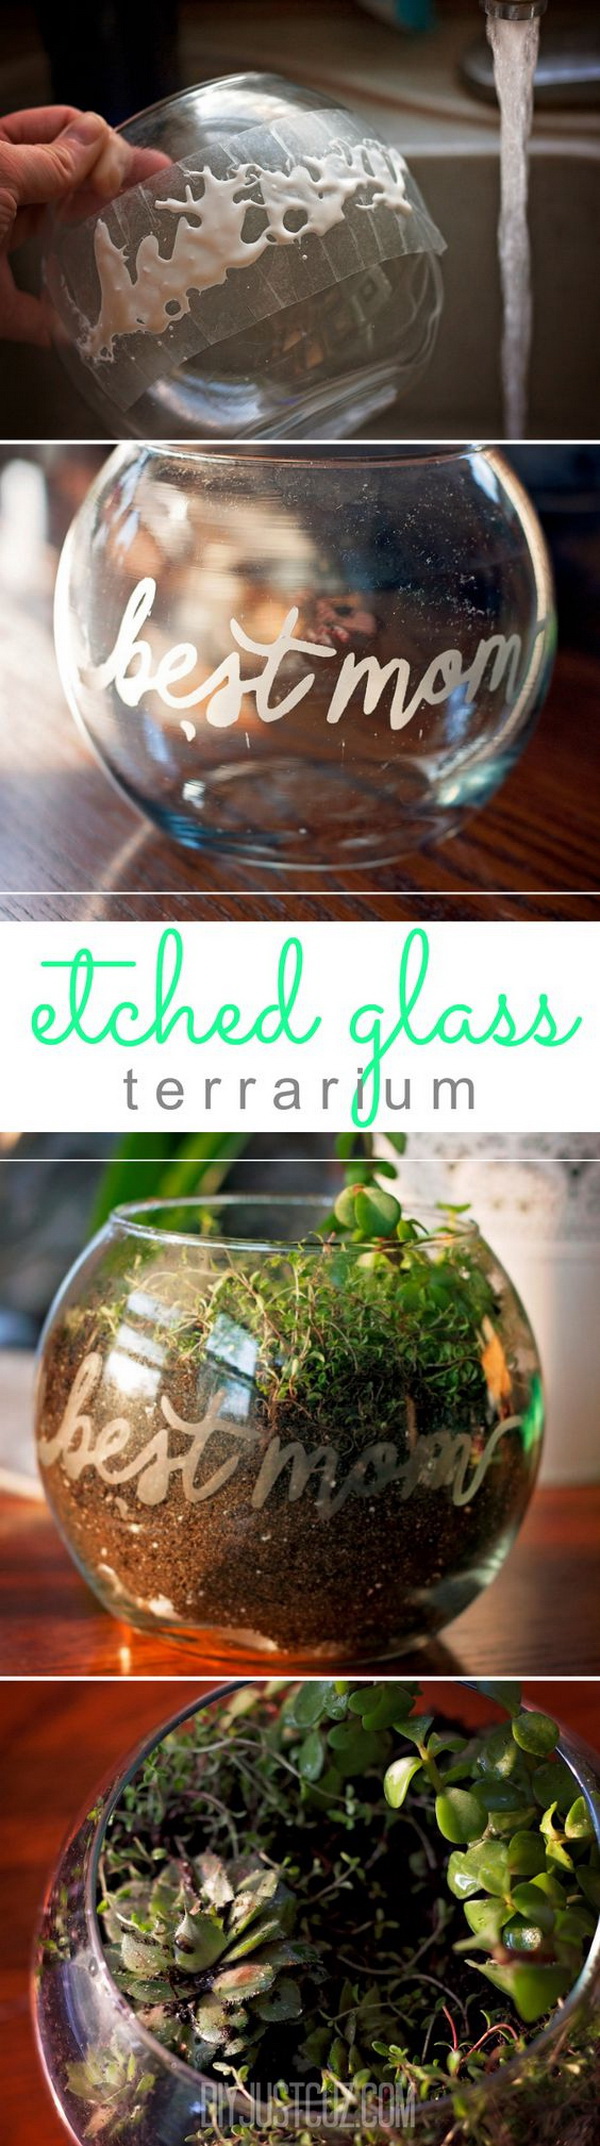 DIY terrarium Planters for Mother’s Day. Handmade, diy gifts are alway the best gifts for your mom! Here’s an etched glass terrarium made using the Silhouette Cameo for Mother’s Day. 